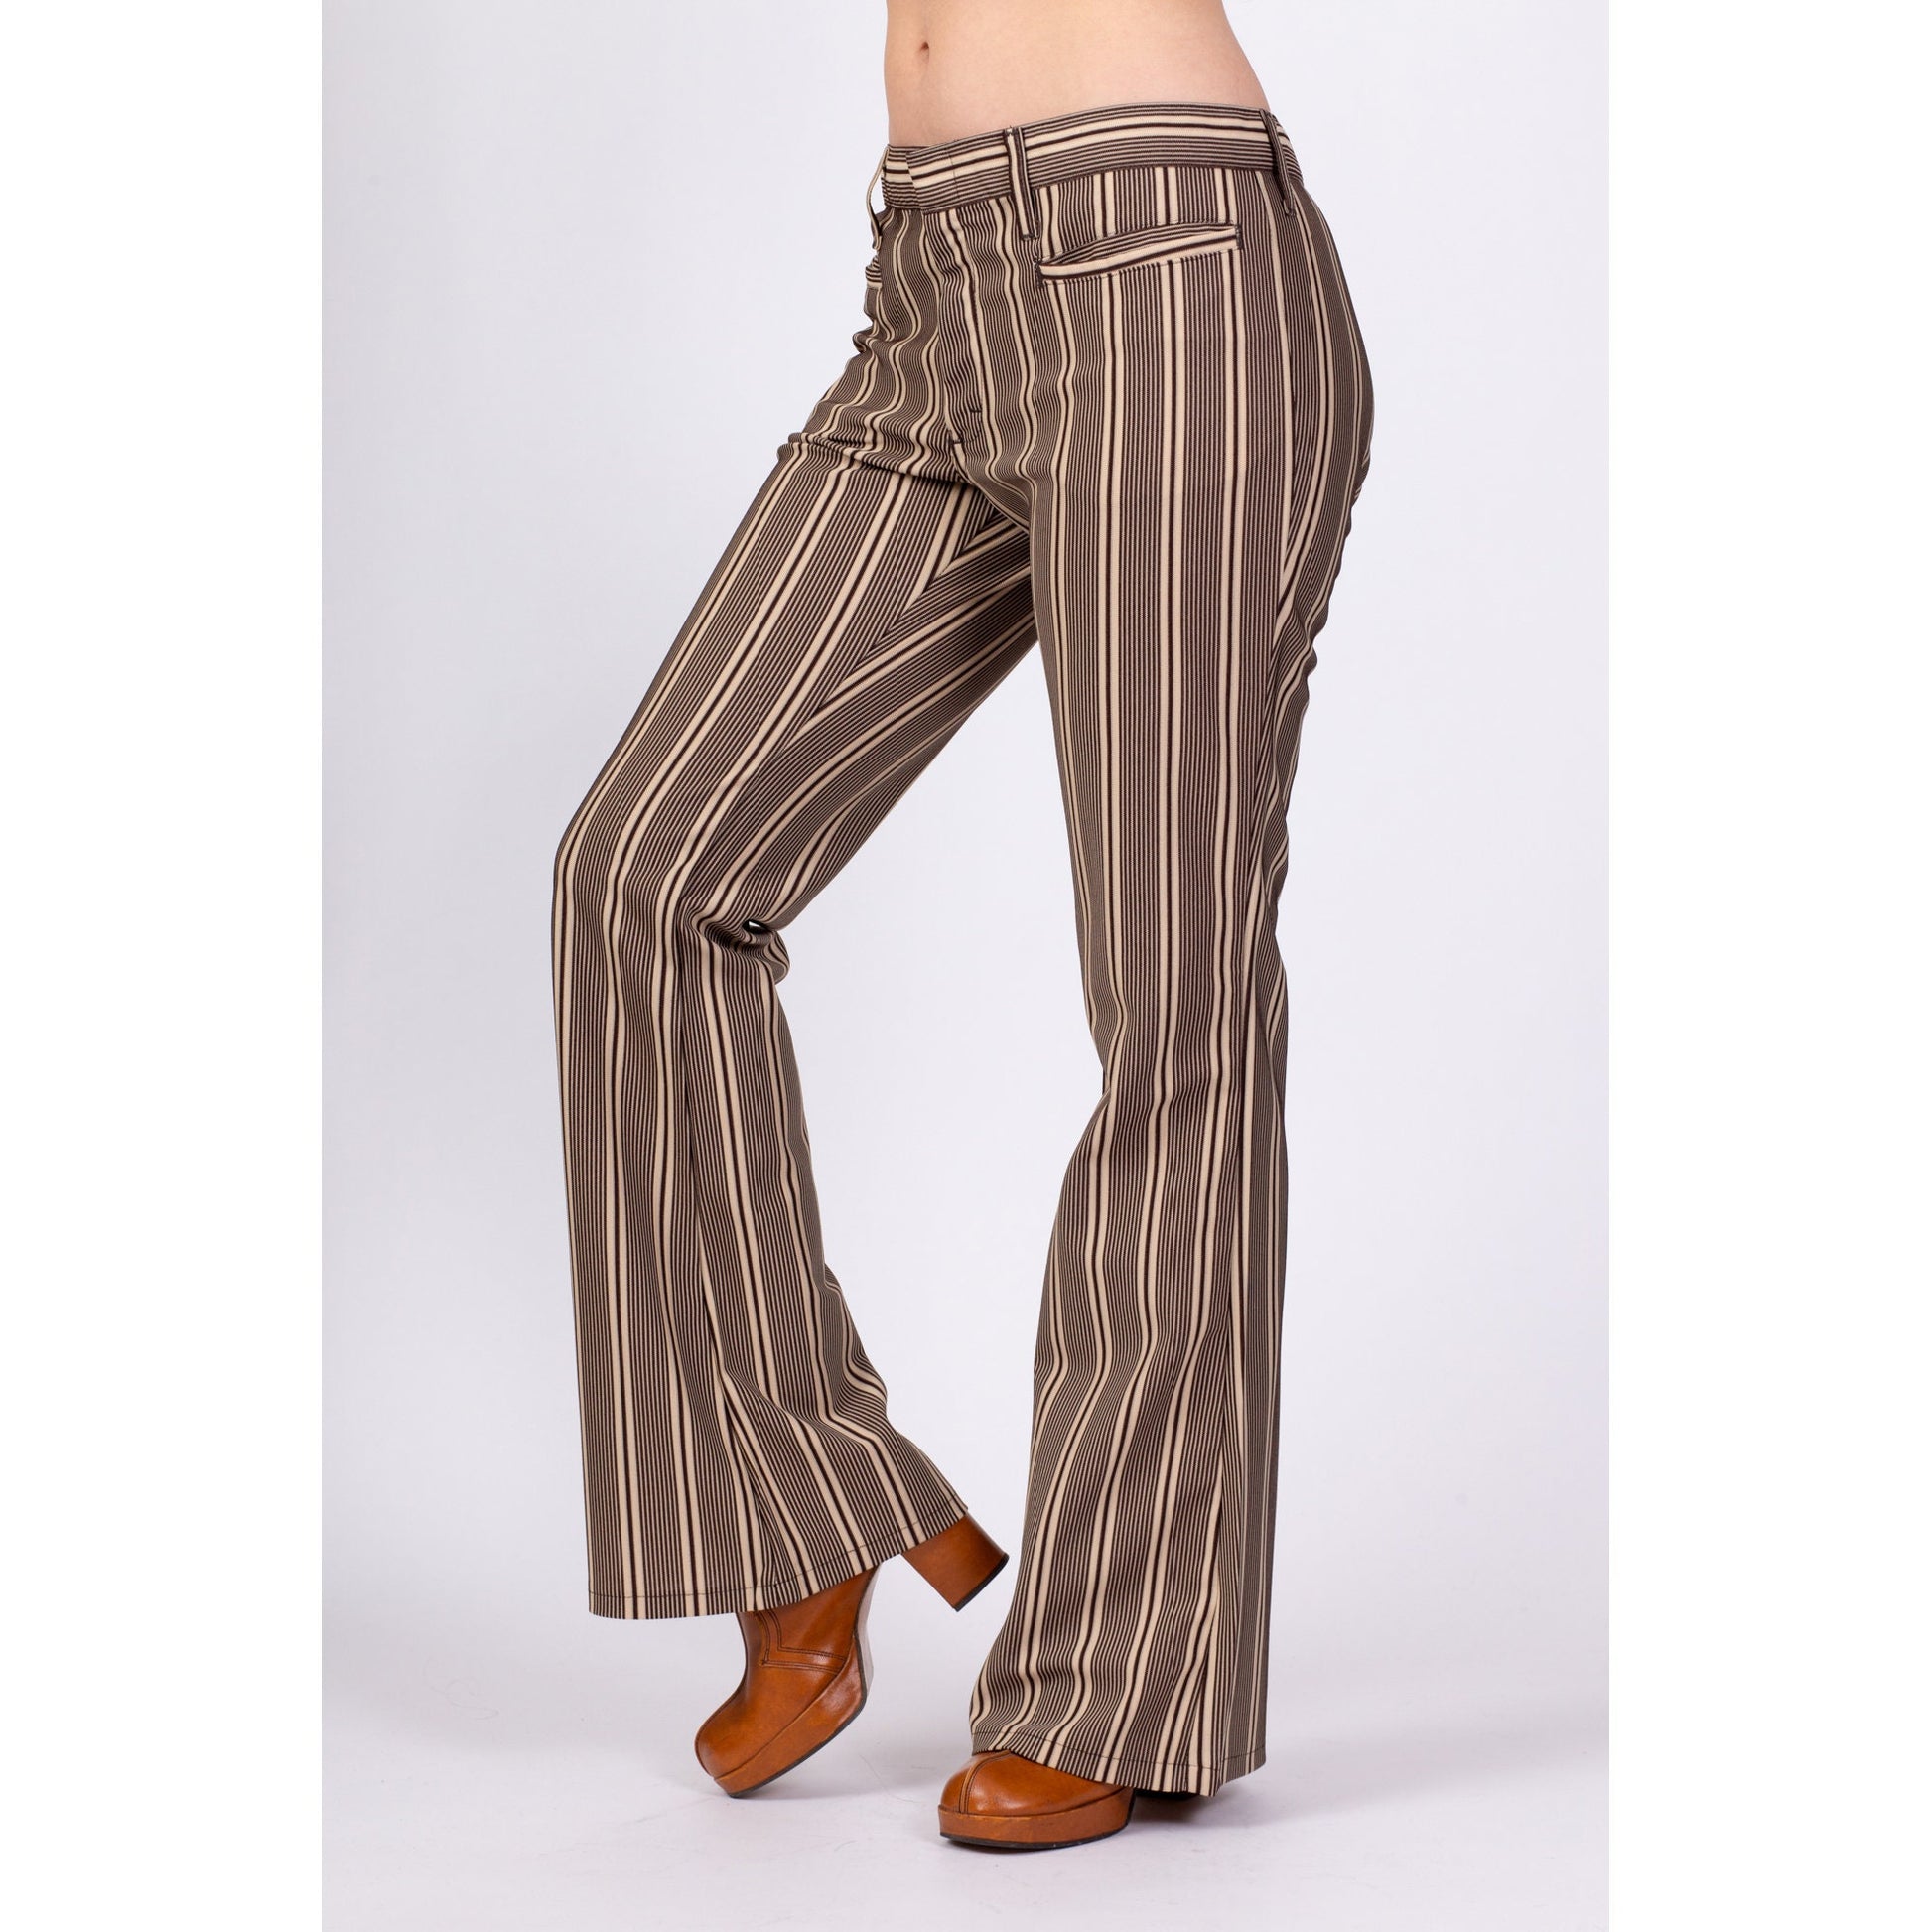 70s Brown & White Striped Bell Bottoms - Medium to Large – Flying Apple  Vintage